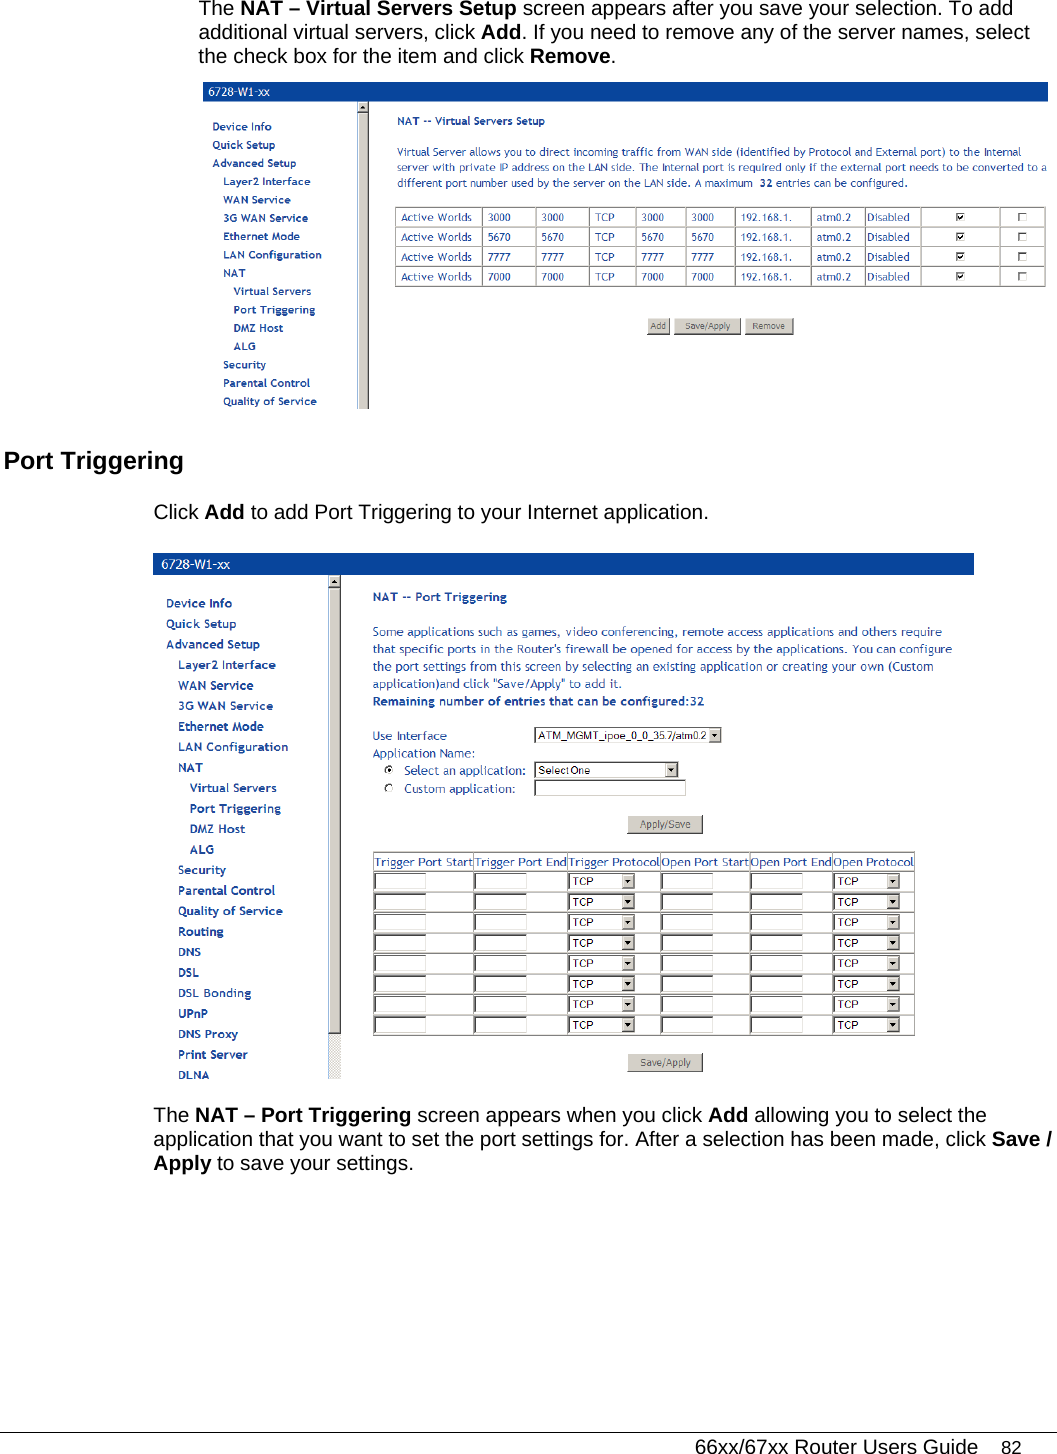   66xx/67xx Router Users Guide 82 The NAT – Virtual Servers Setup screen appears after you save your selection. To add additional virtual servers, click Add. If you need to remove any of the server names, select the check box for the item and click Remove.  Port Triggering  Click Add to add Port Triggering to your Internet application.   The NAT – Port Triggering screen appears when you click Add allowing you to select the application that you want to set the port settings for. After a selection has been made, click Save / Apply to save your settings. 